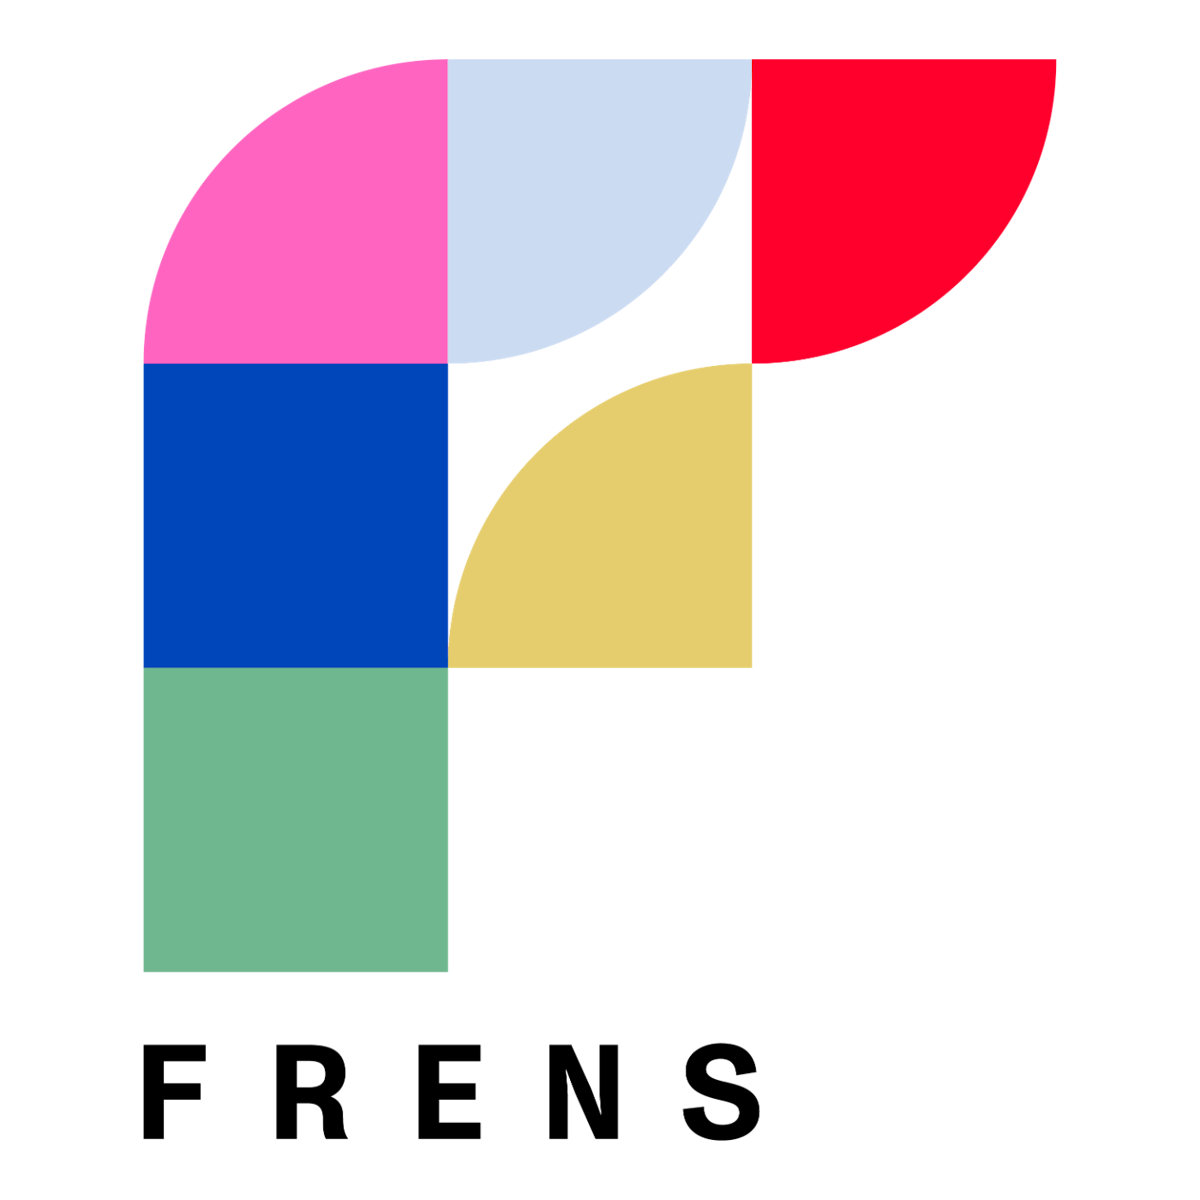 featured image - Reinventing Community Building - Interview with Startups of the Year Nominee, Frens